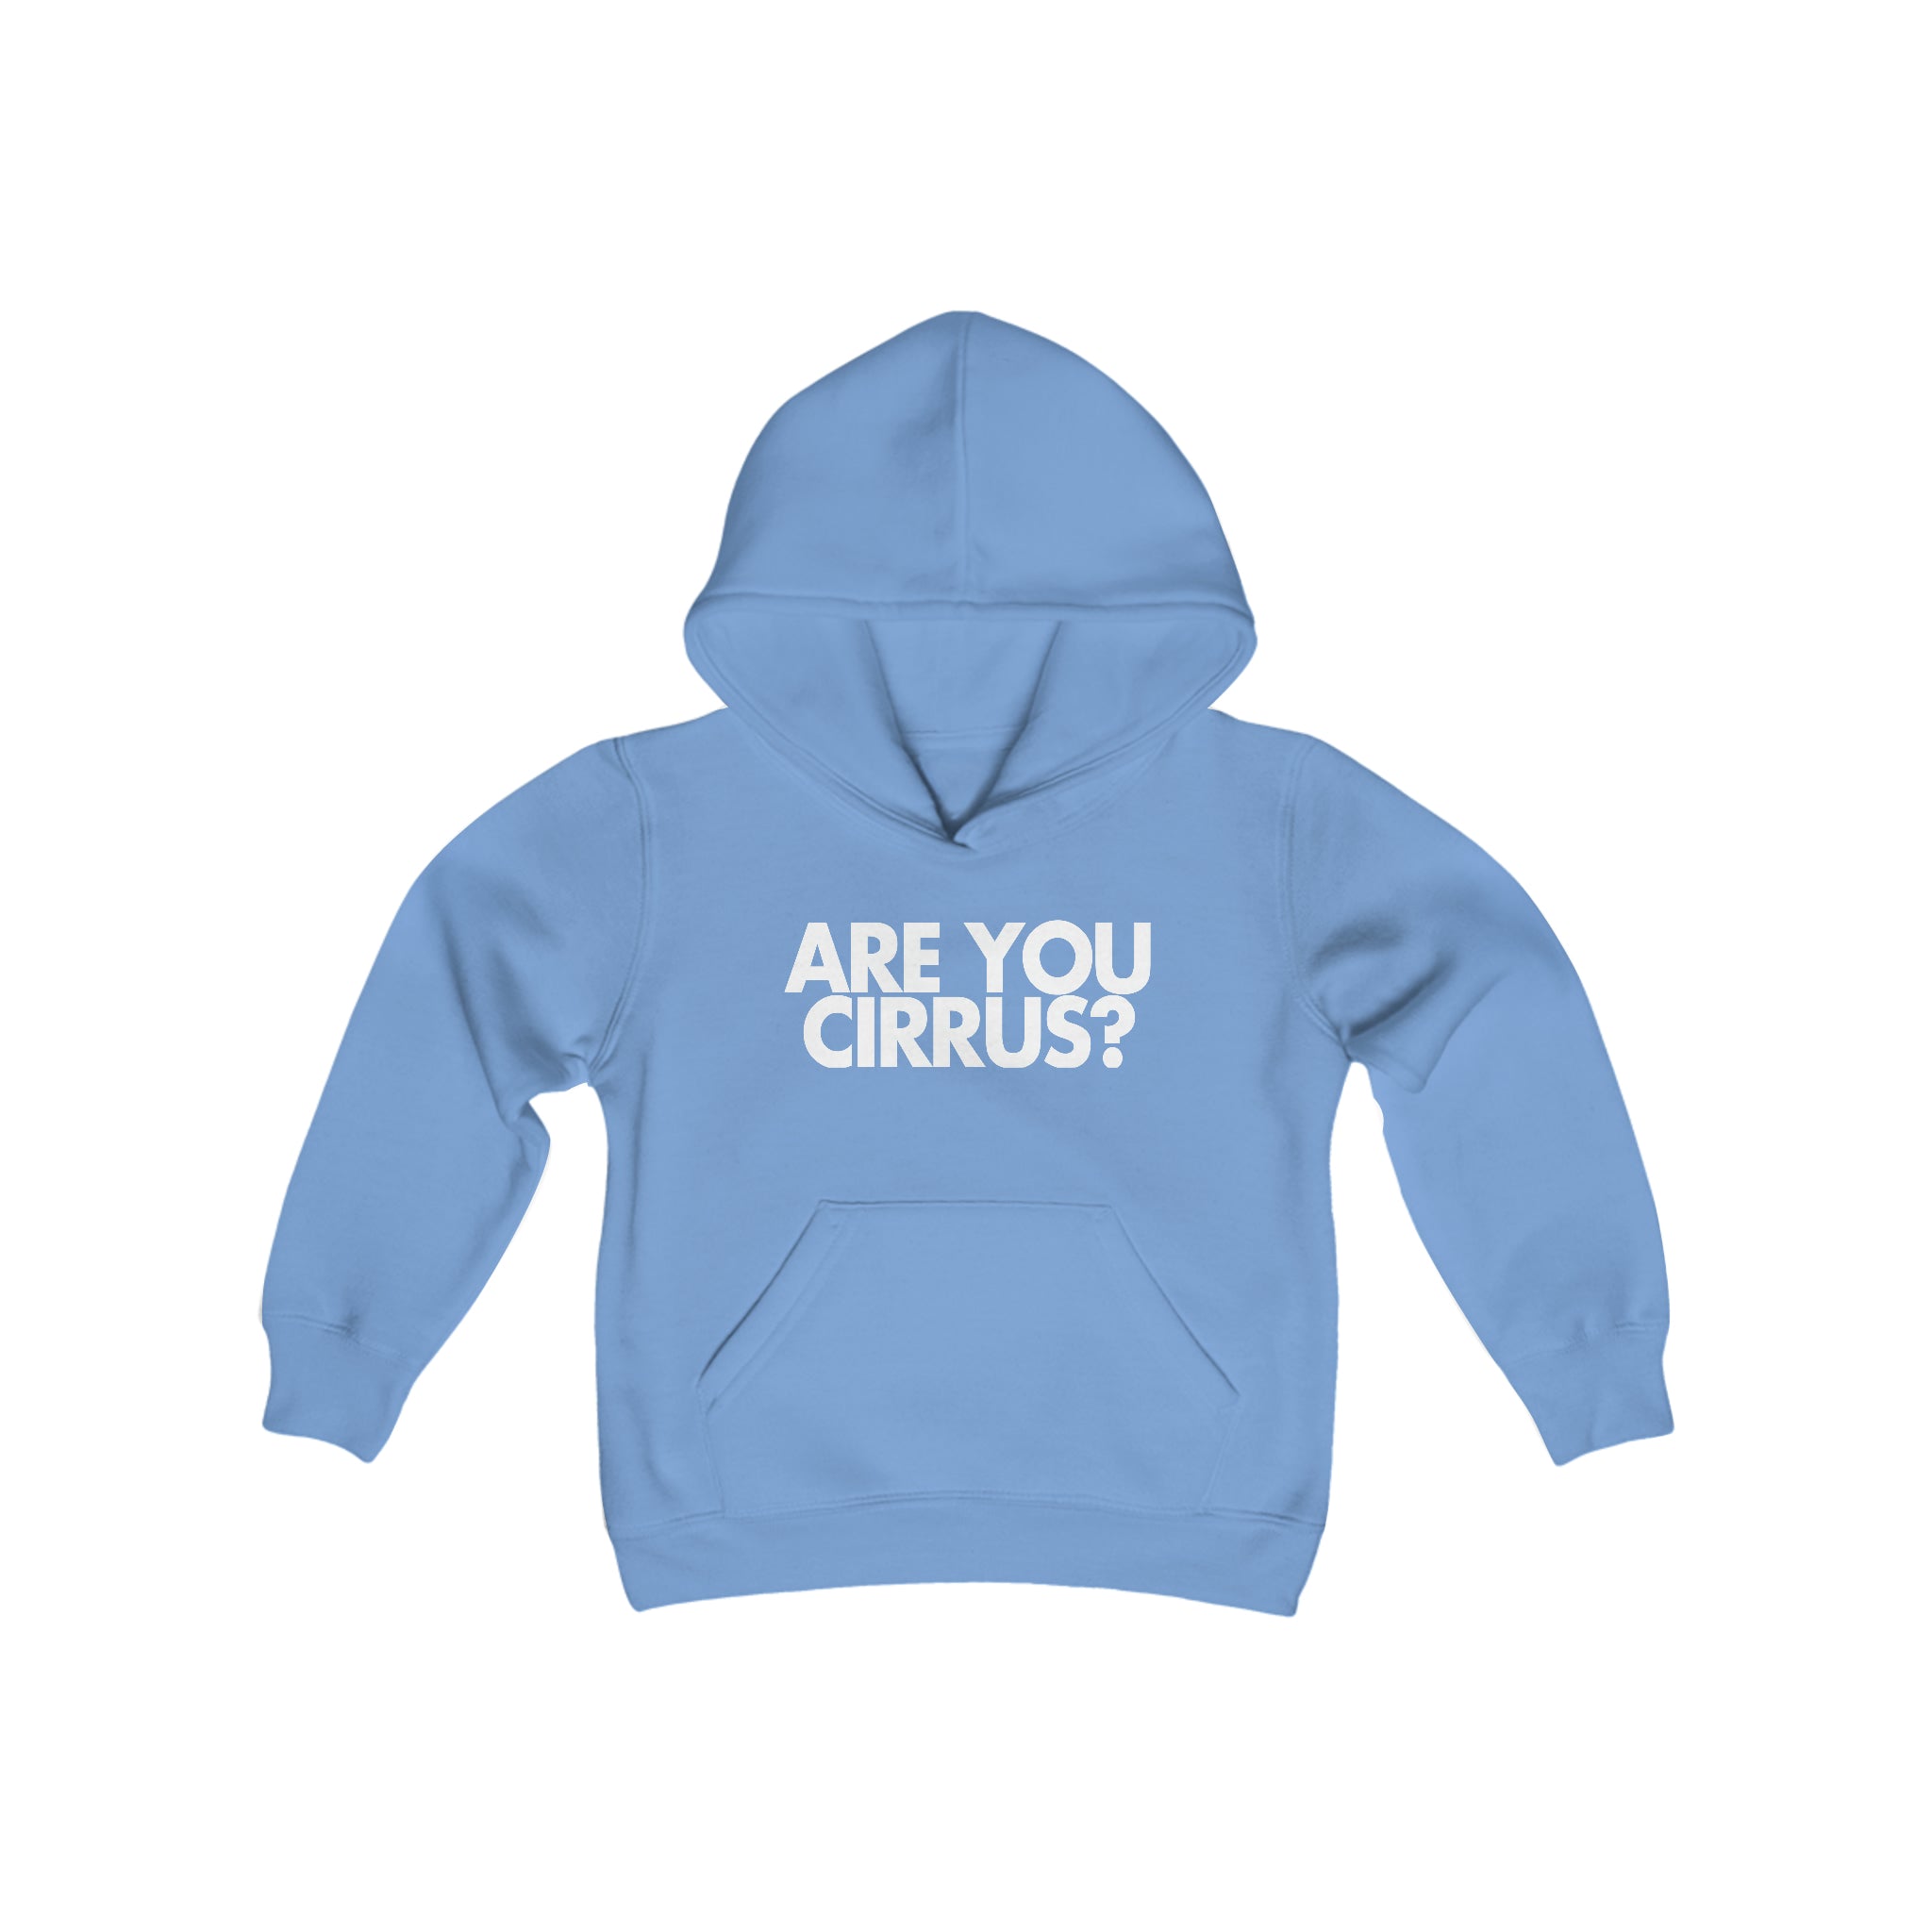 Are You Cirrus? Children's Hoodie 